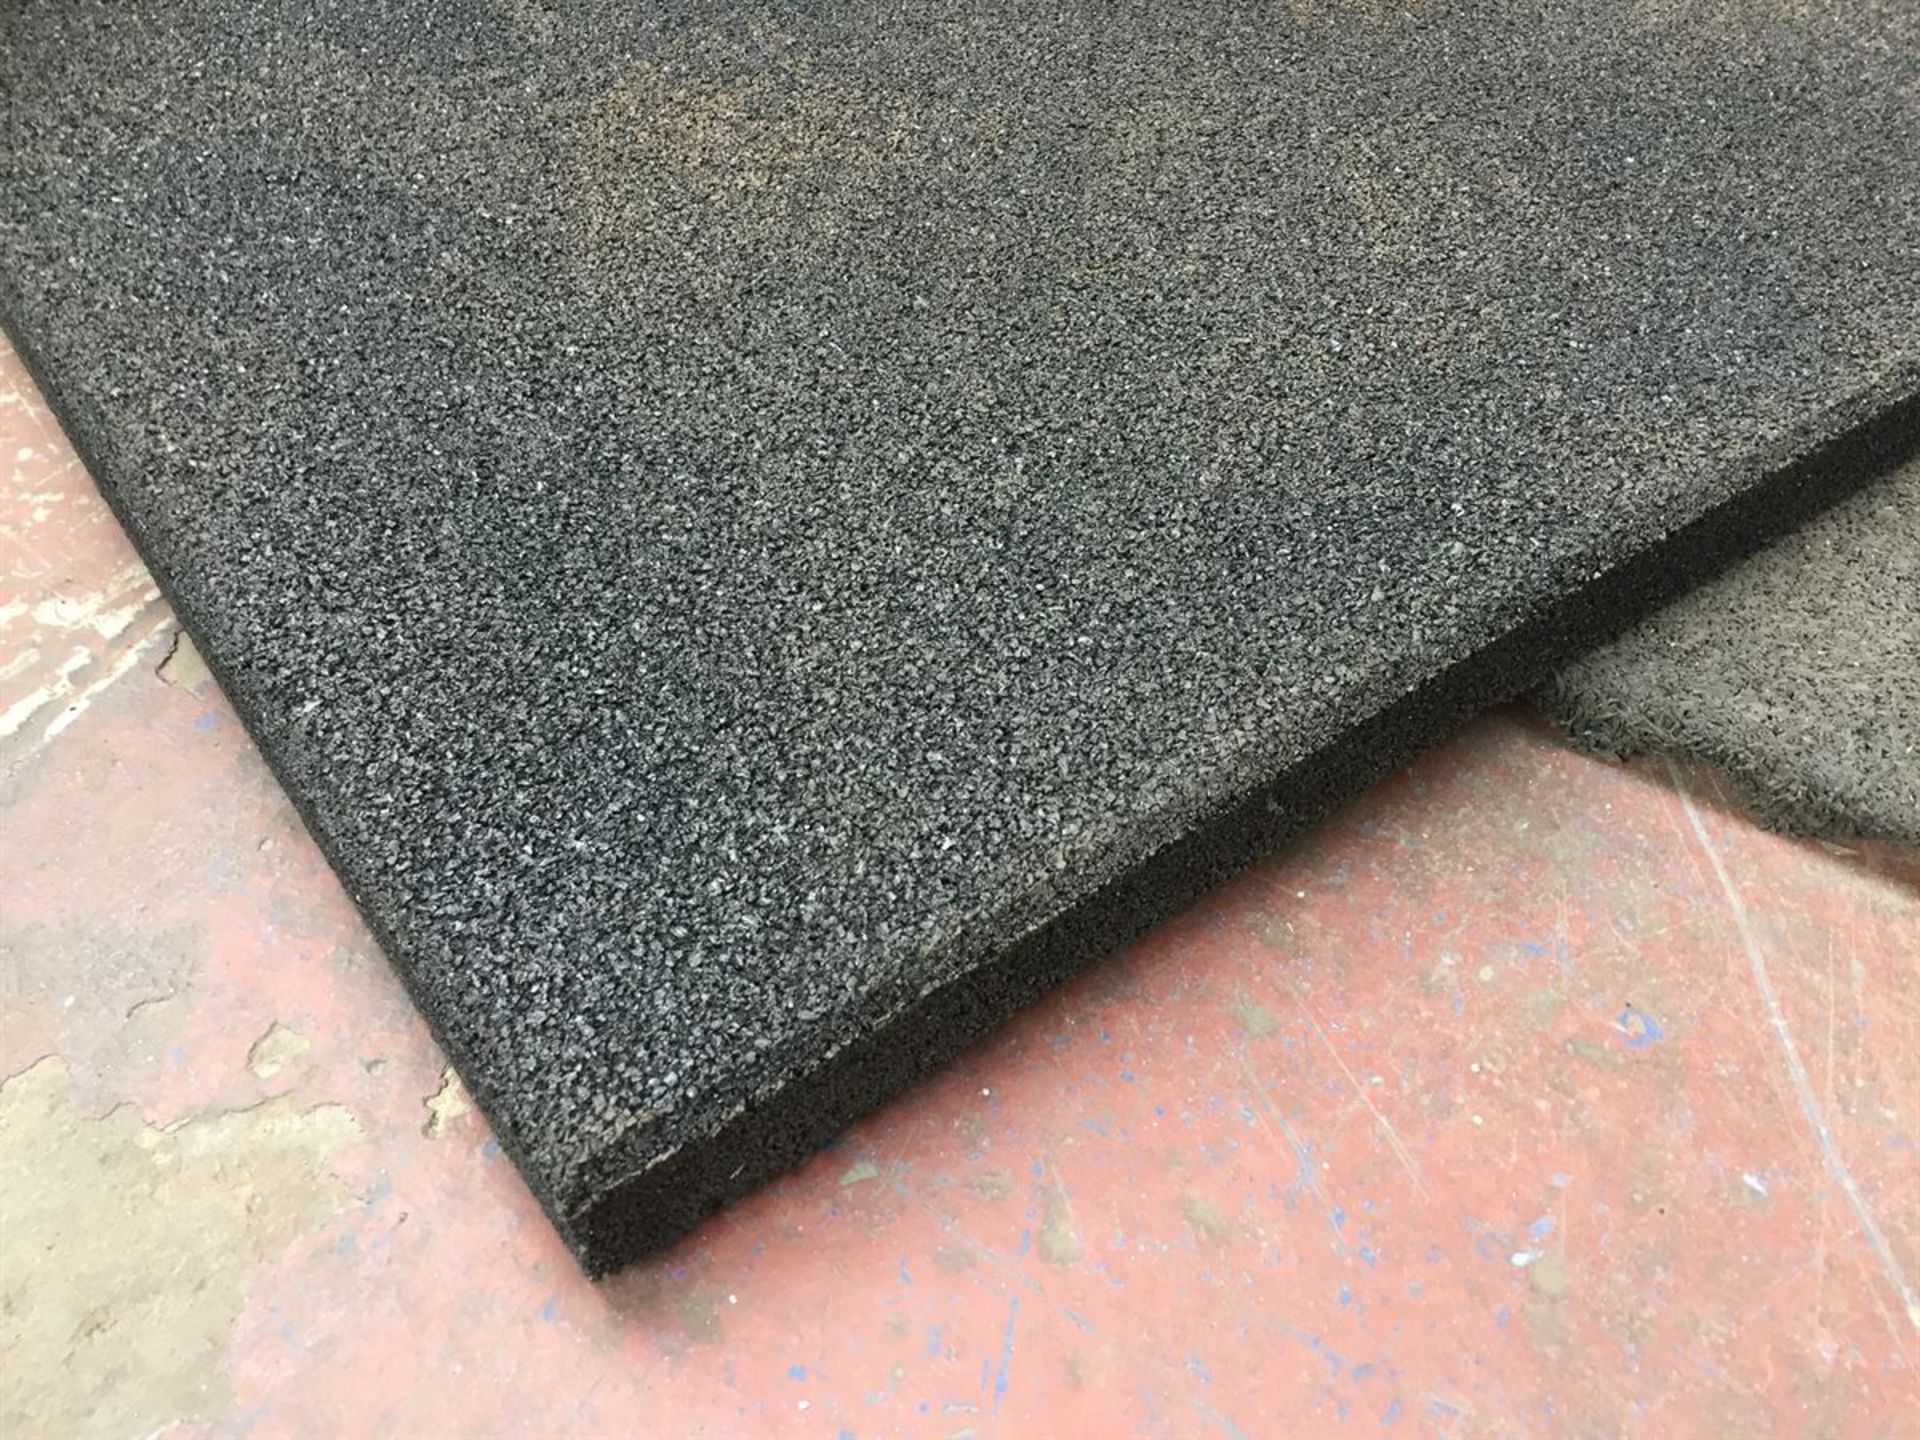 2x 1m x 1m 40mm Thick Rubber Playground Tile - Image 2 of 2